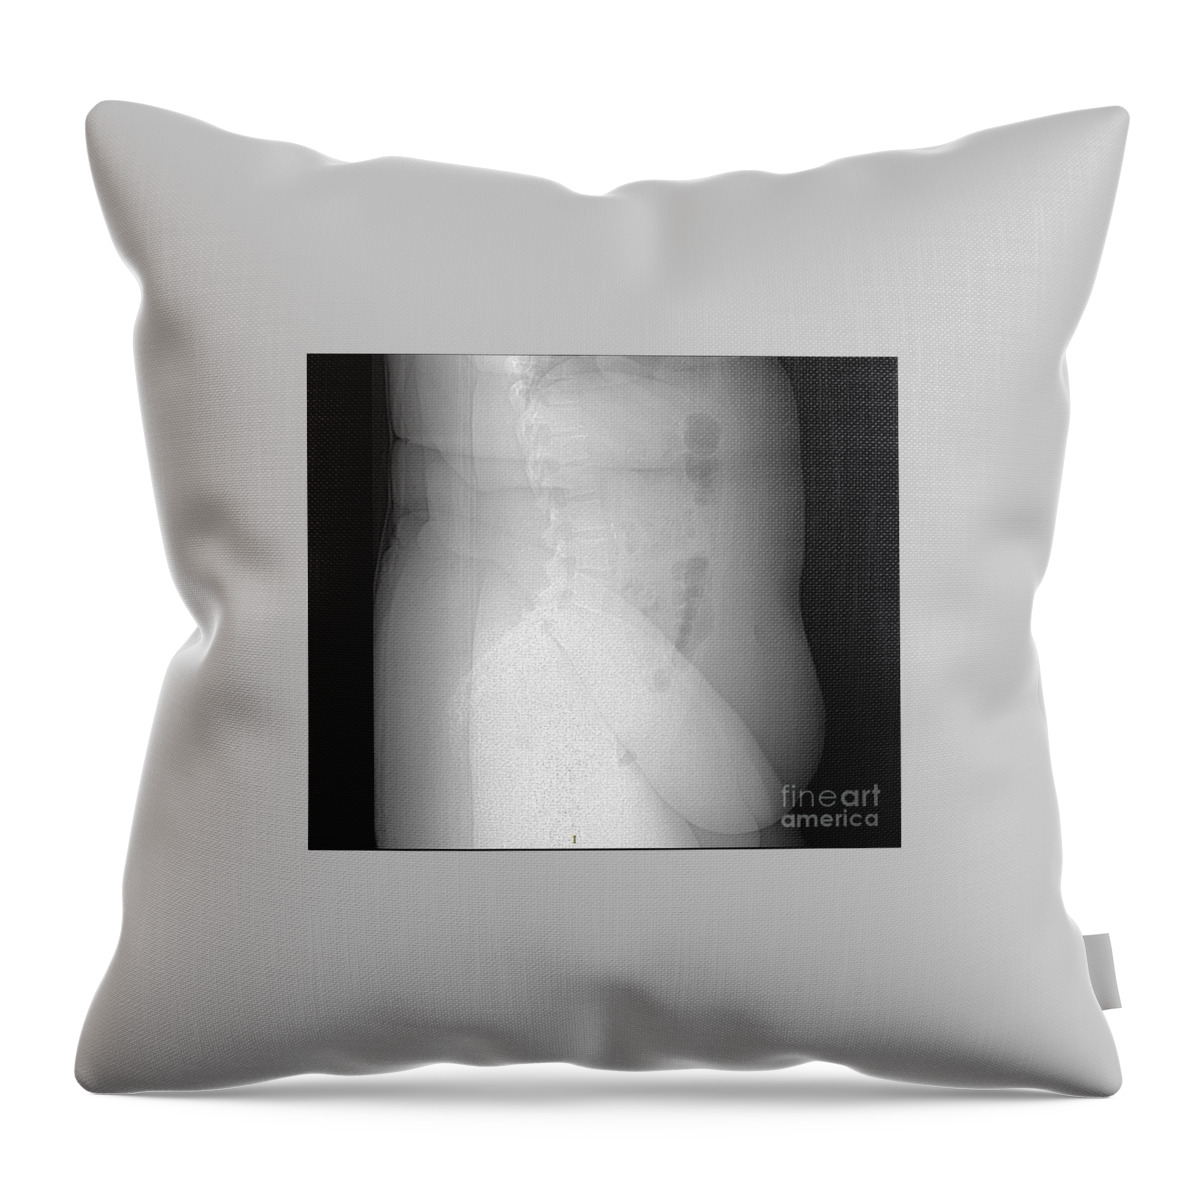 Science Throw Pillow featuring the photograph X-ray Of Morbidly Obese Patient #1 by Living Art Enterprises